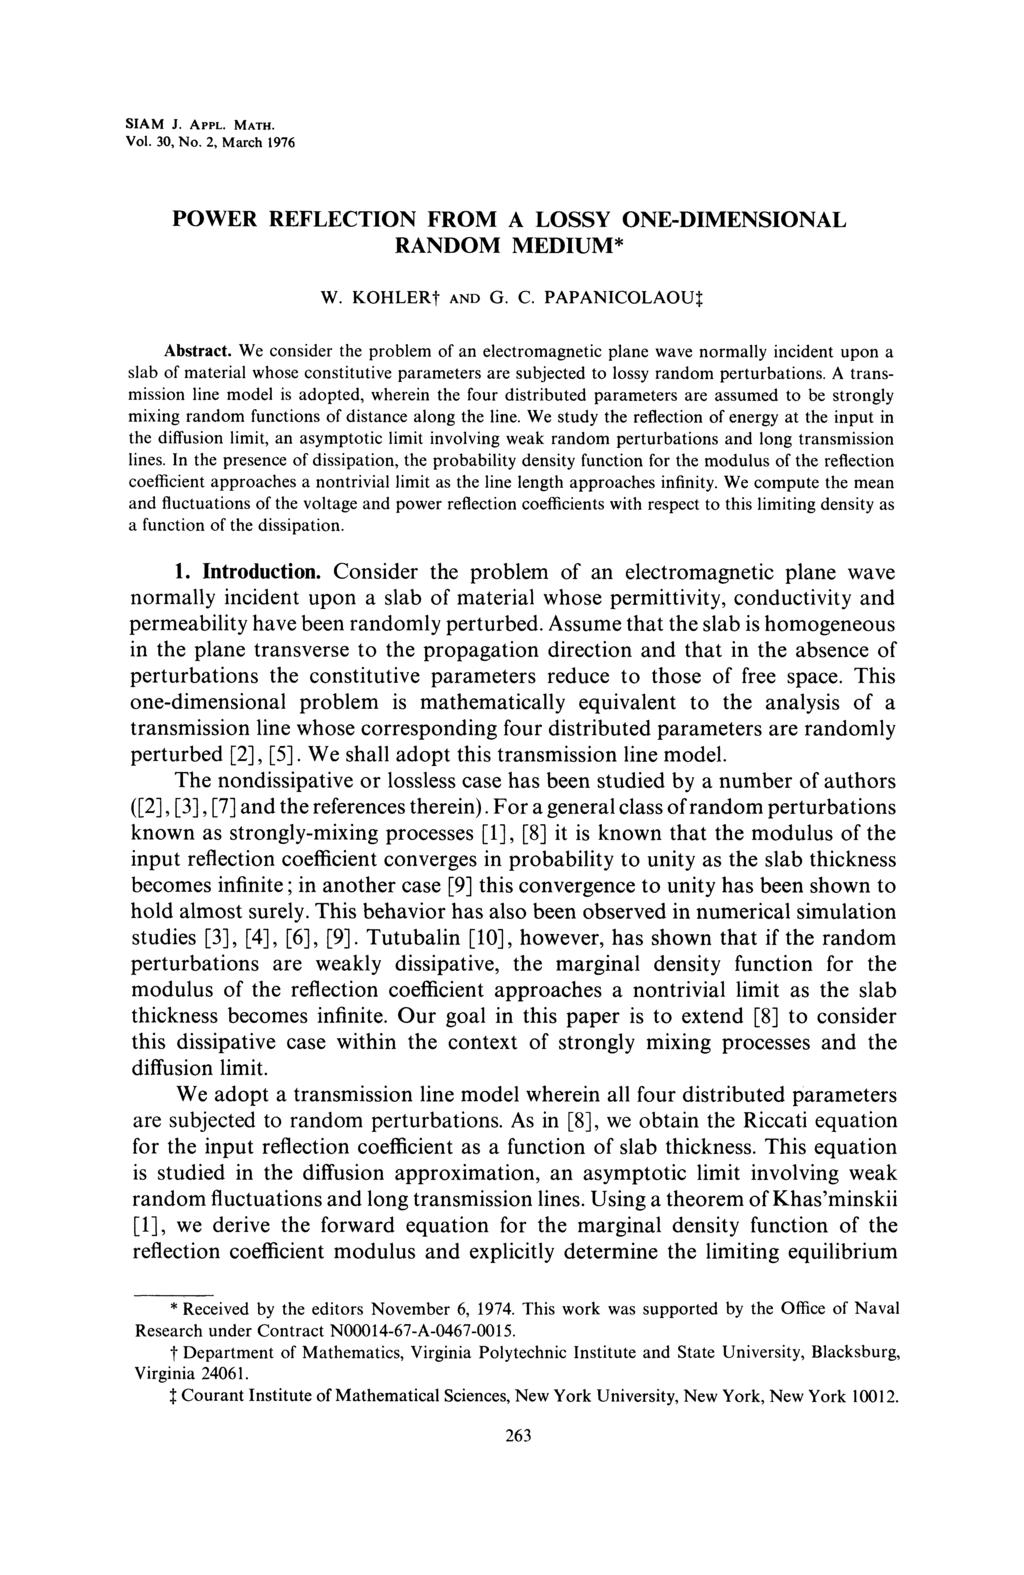 SIAM J. APPL. MATH. Vol. 30, No. 2, March 1976 POWER REFLECTION FROM A LOSSY ONEDIMENSIONAL RANDOM MEDIUM* W. KOHLERf AND G. C. PAPANICOLAOU Abstract.